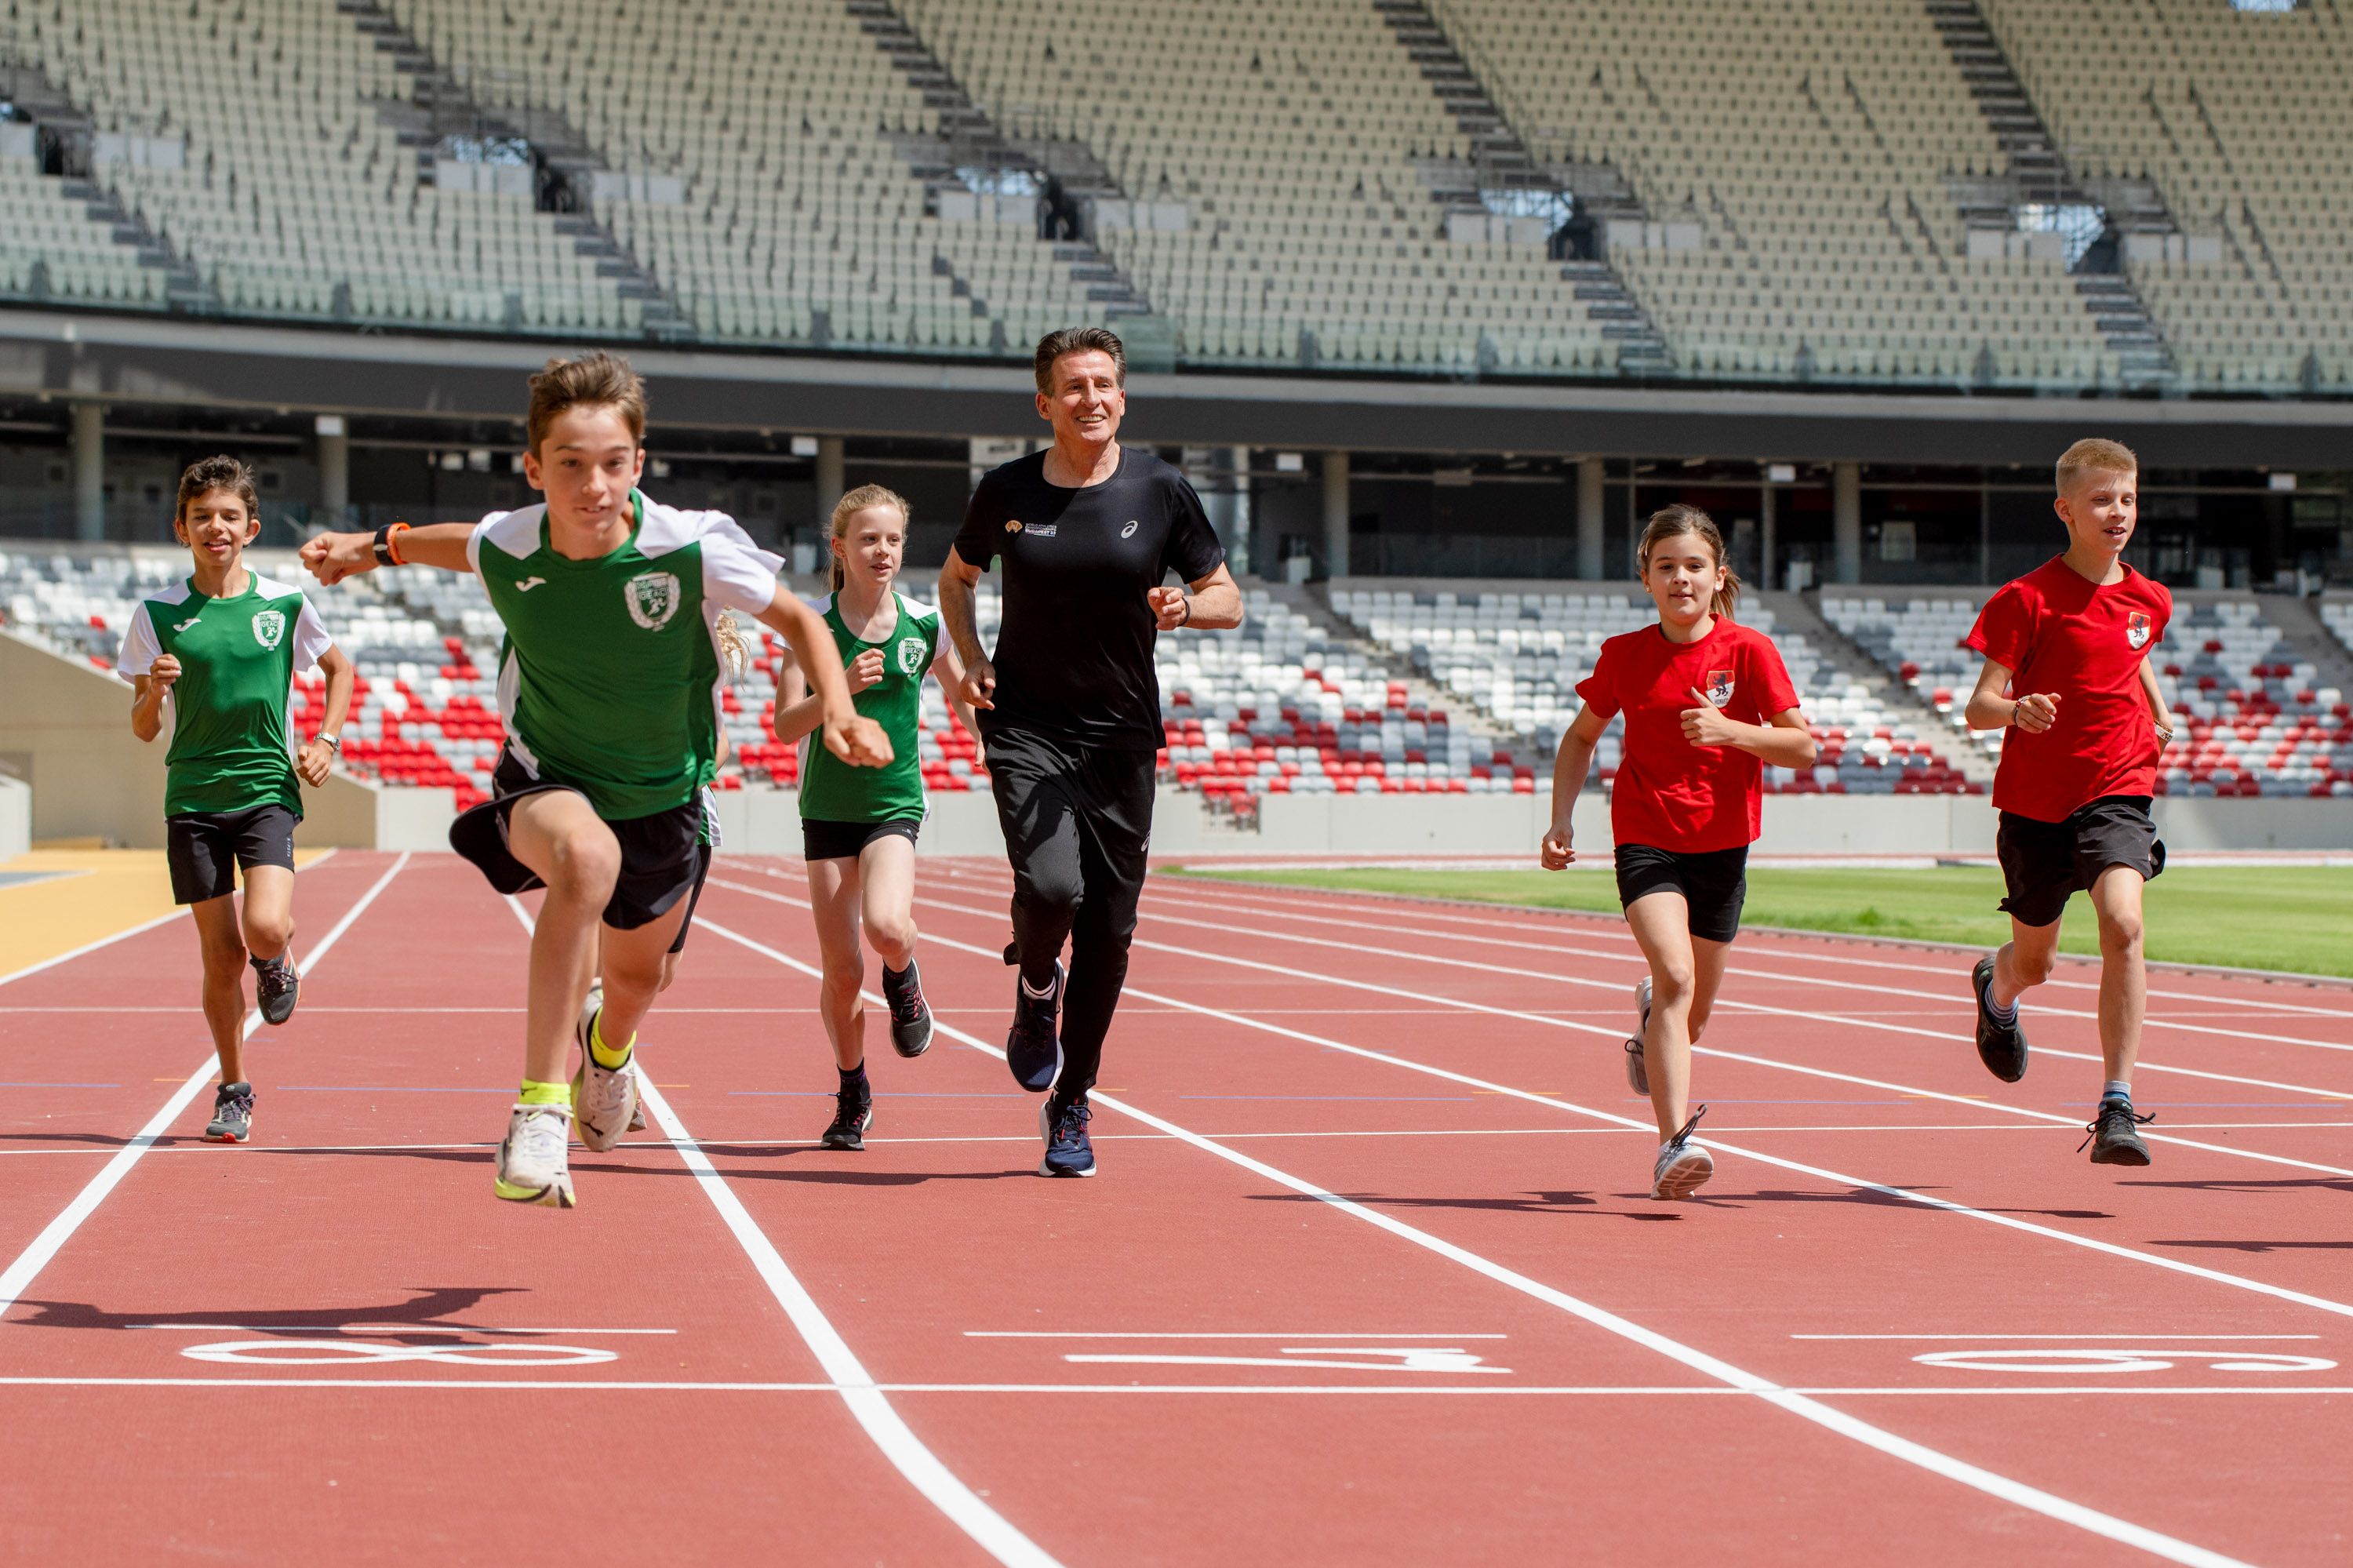 Sebastian Coe's inaugural lap at Budapest's brand new National Athletic Centre